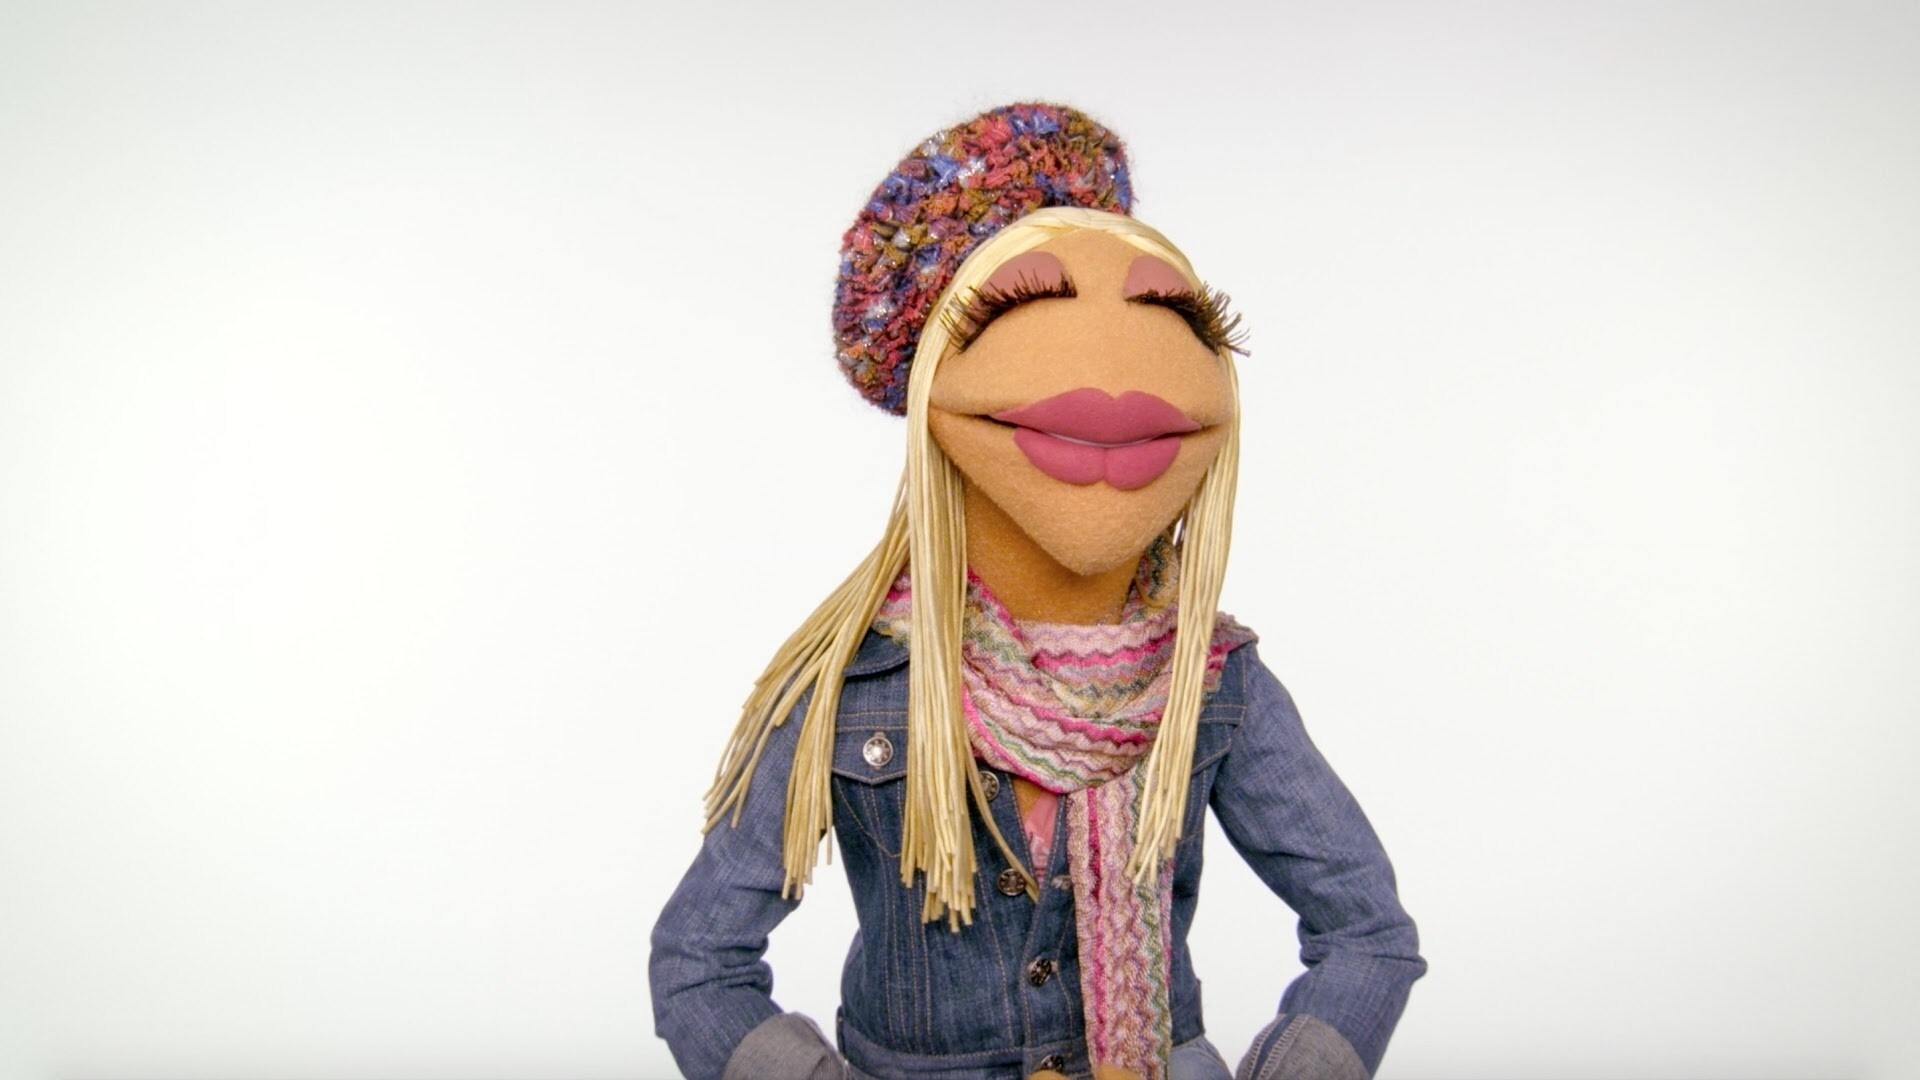 Janice Is All In On Optimism | Muppet Thought of the Week by The Muppets